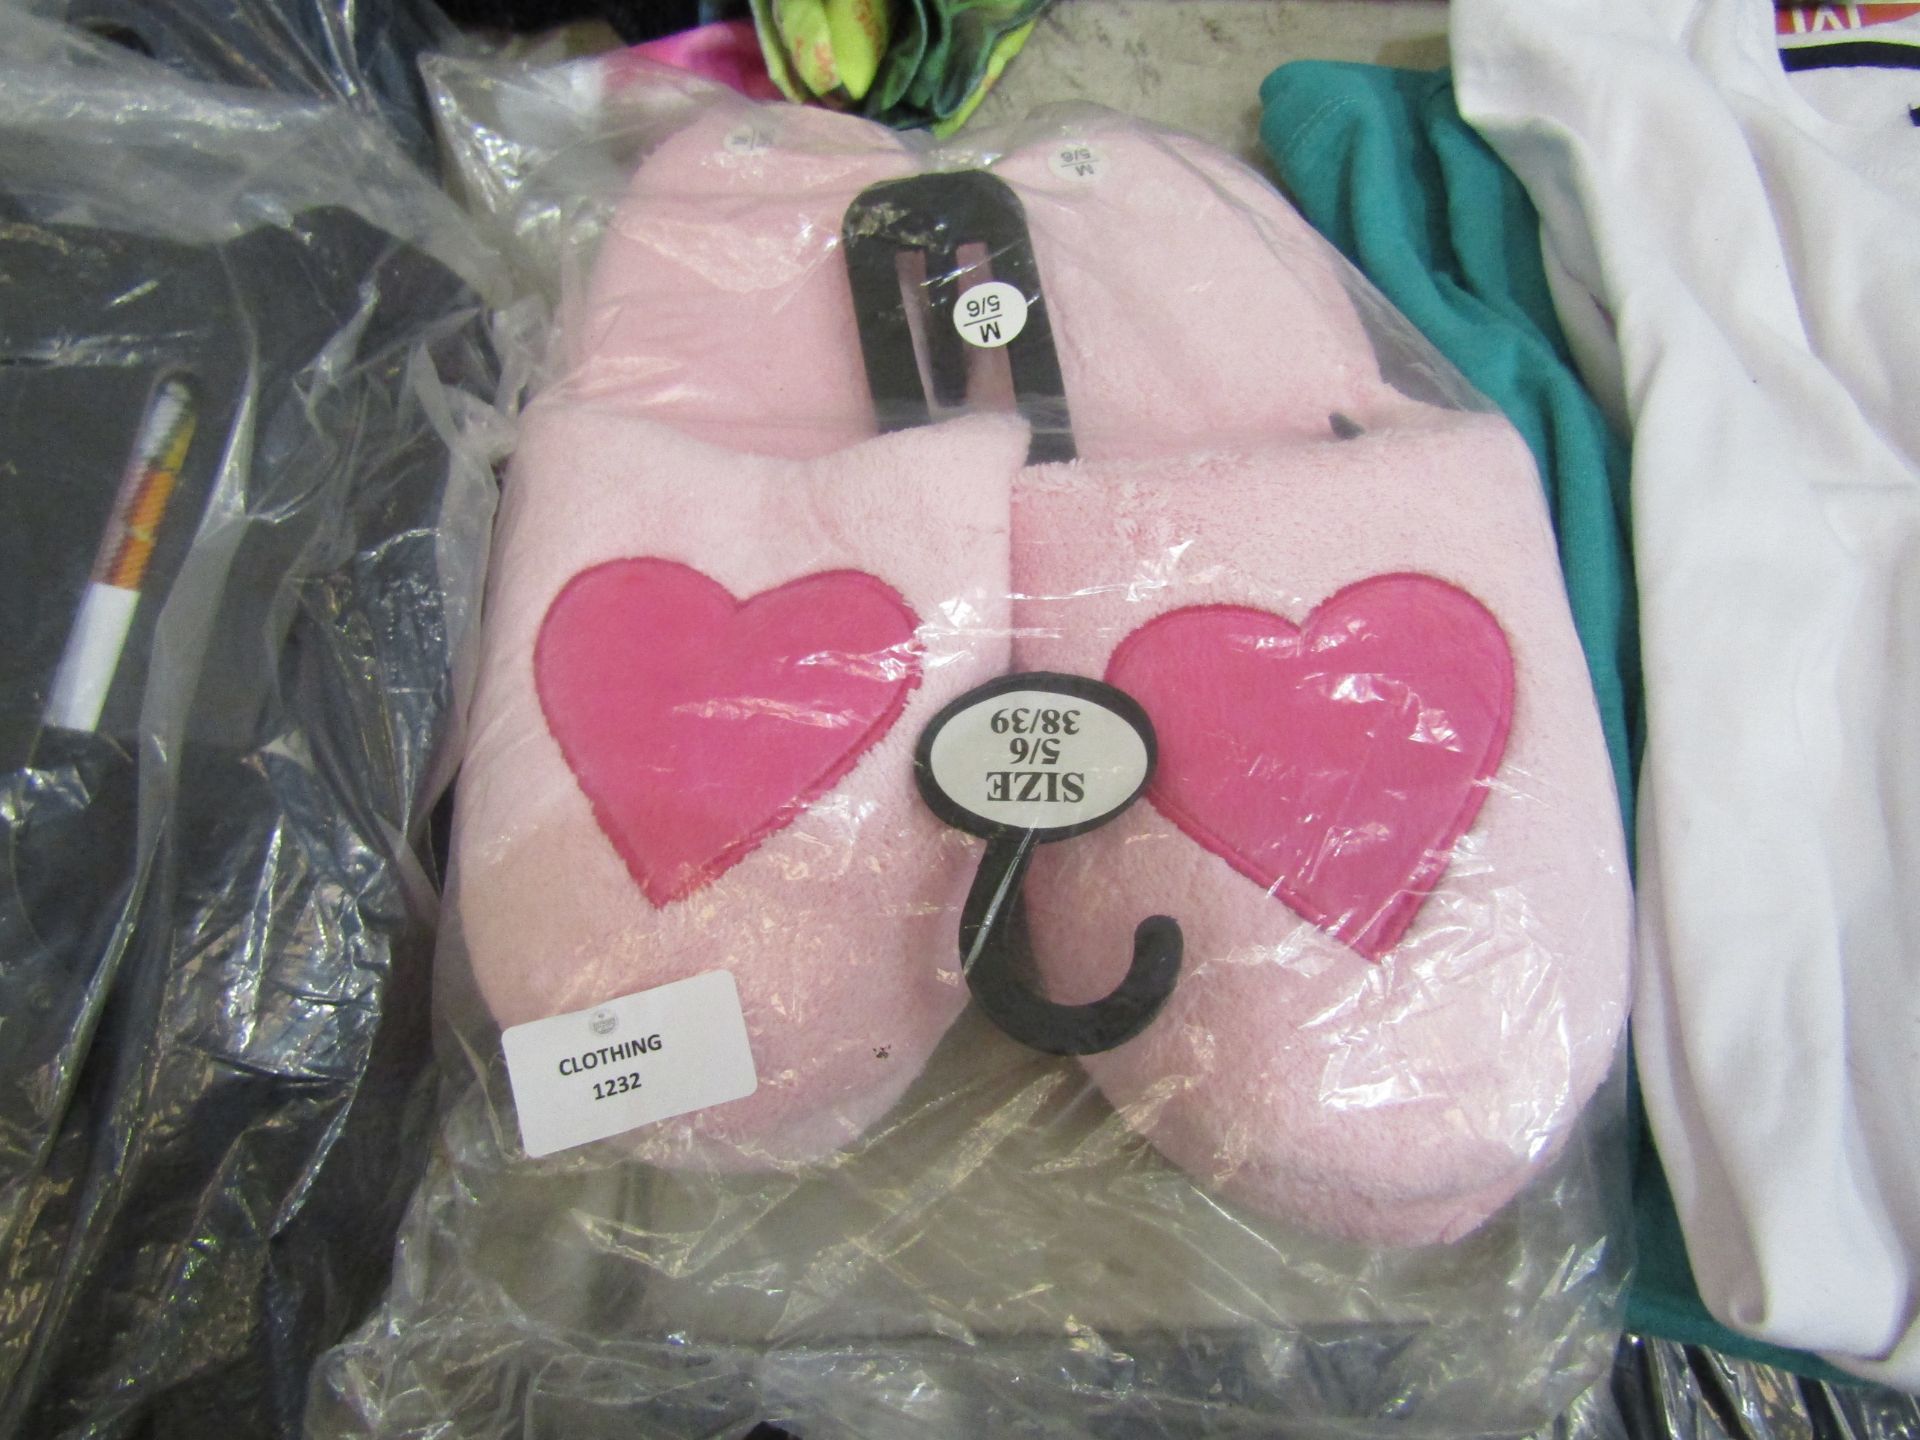 1 X Pair of Ladies Pink Slippers Size 5/6 New & Packaged